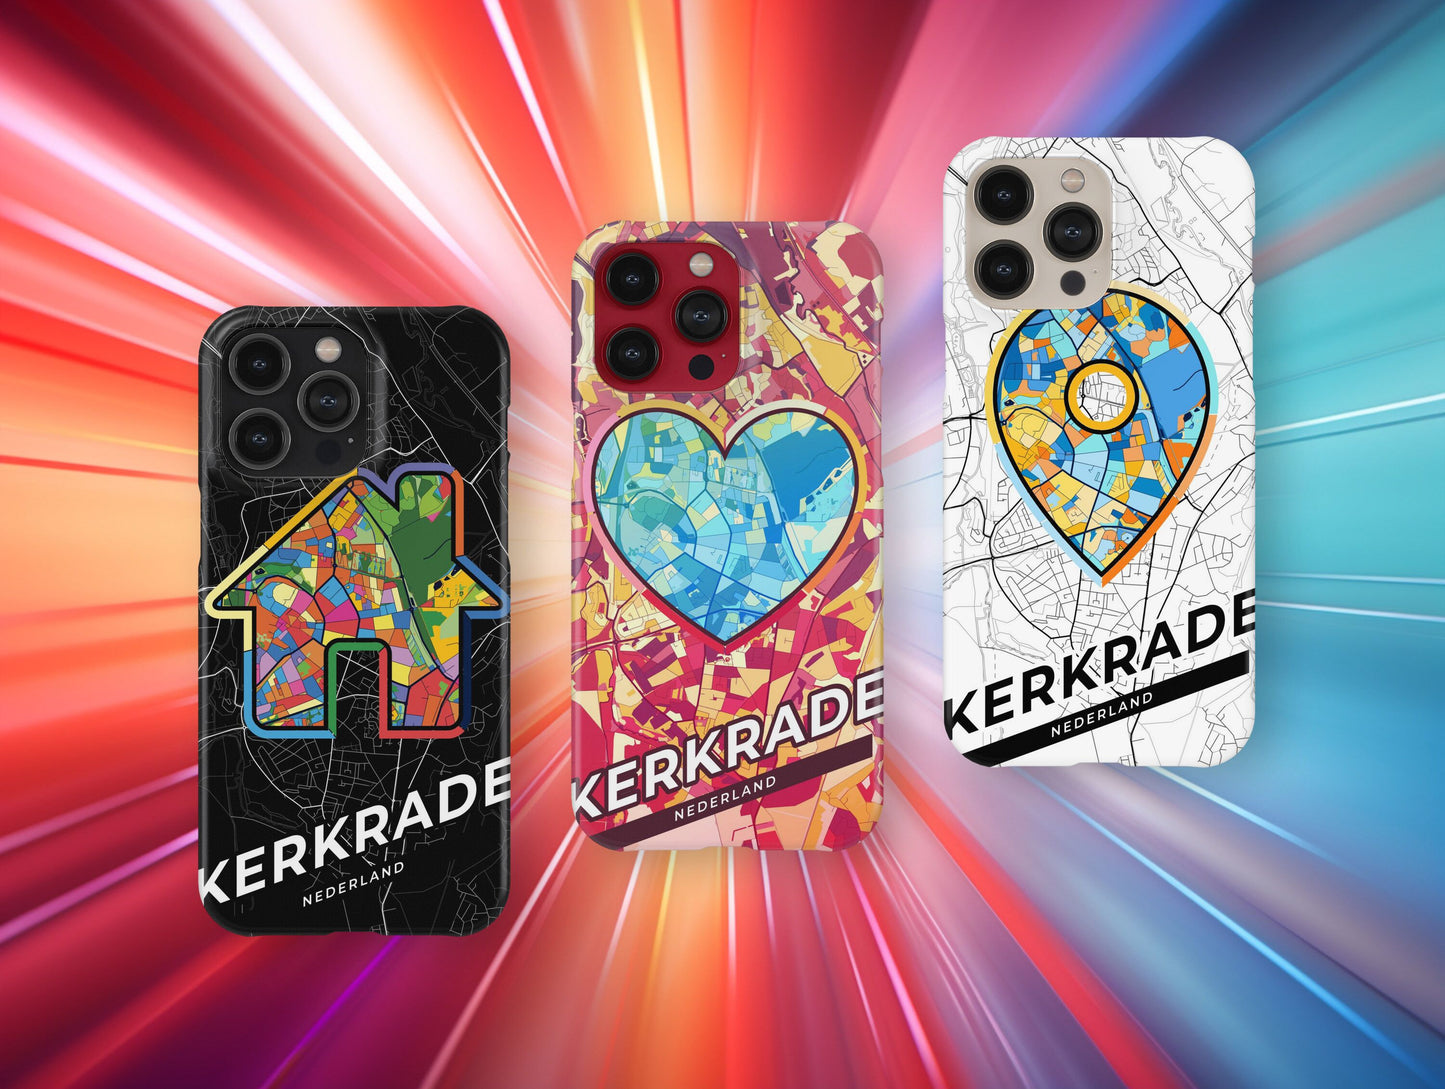 Kerkrade Netherlands slim phone case with colorful icon. Birthday, wedding or housewarming gift. Couple match cases.